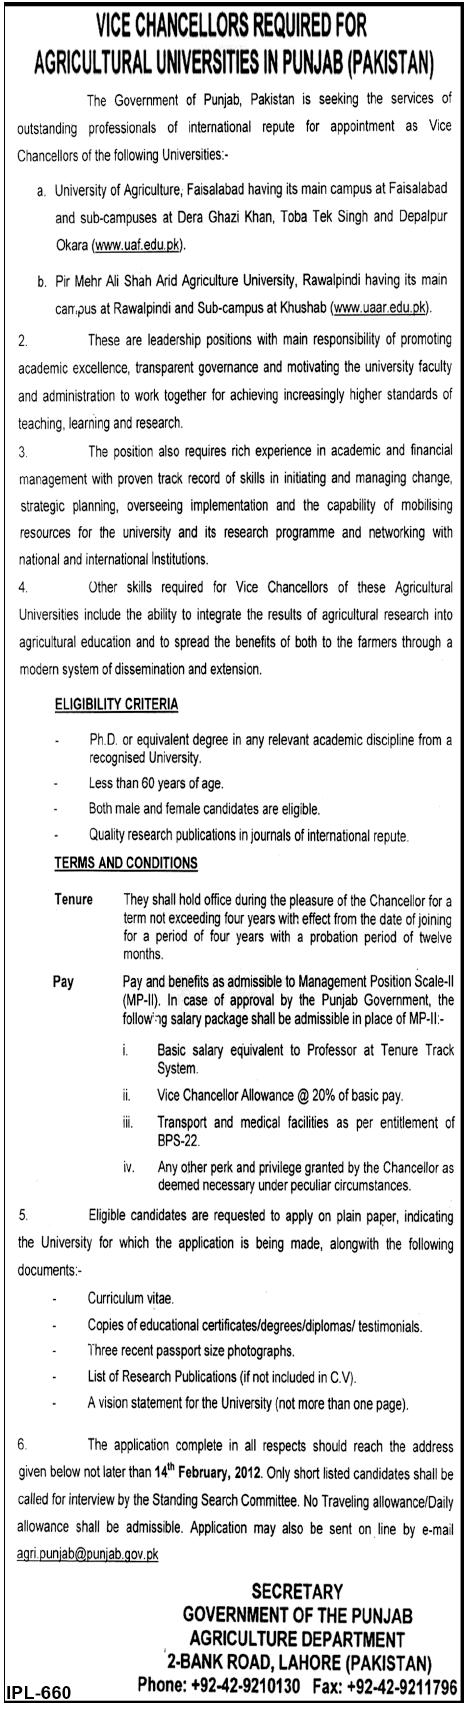 Agricultural Universities in Punjab (Pakistan) Required the Services of Vice Chancellors